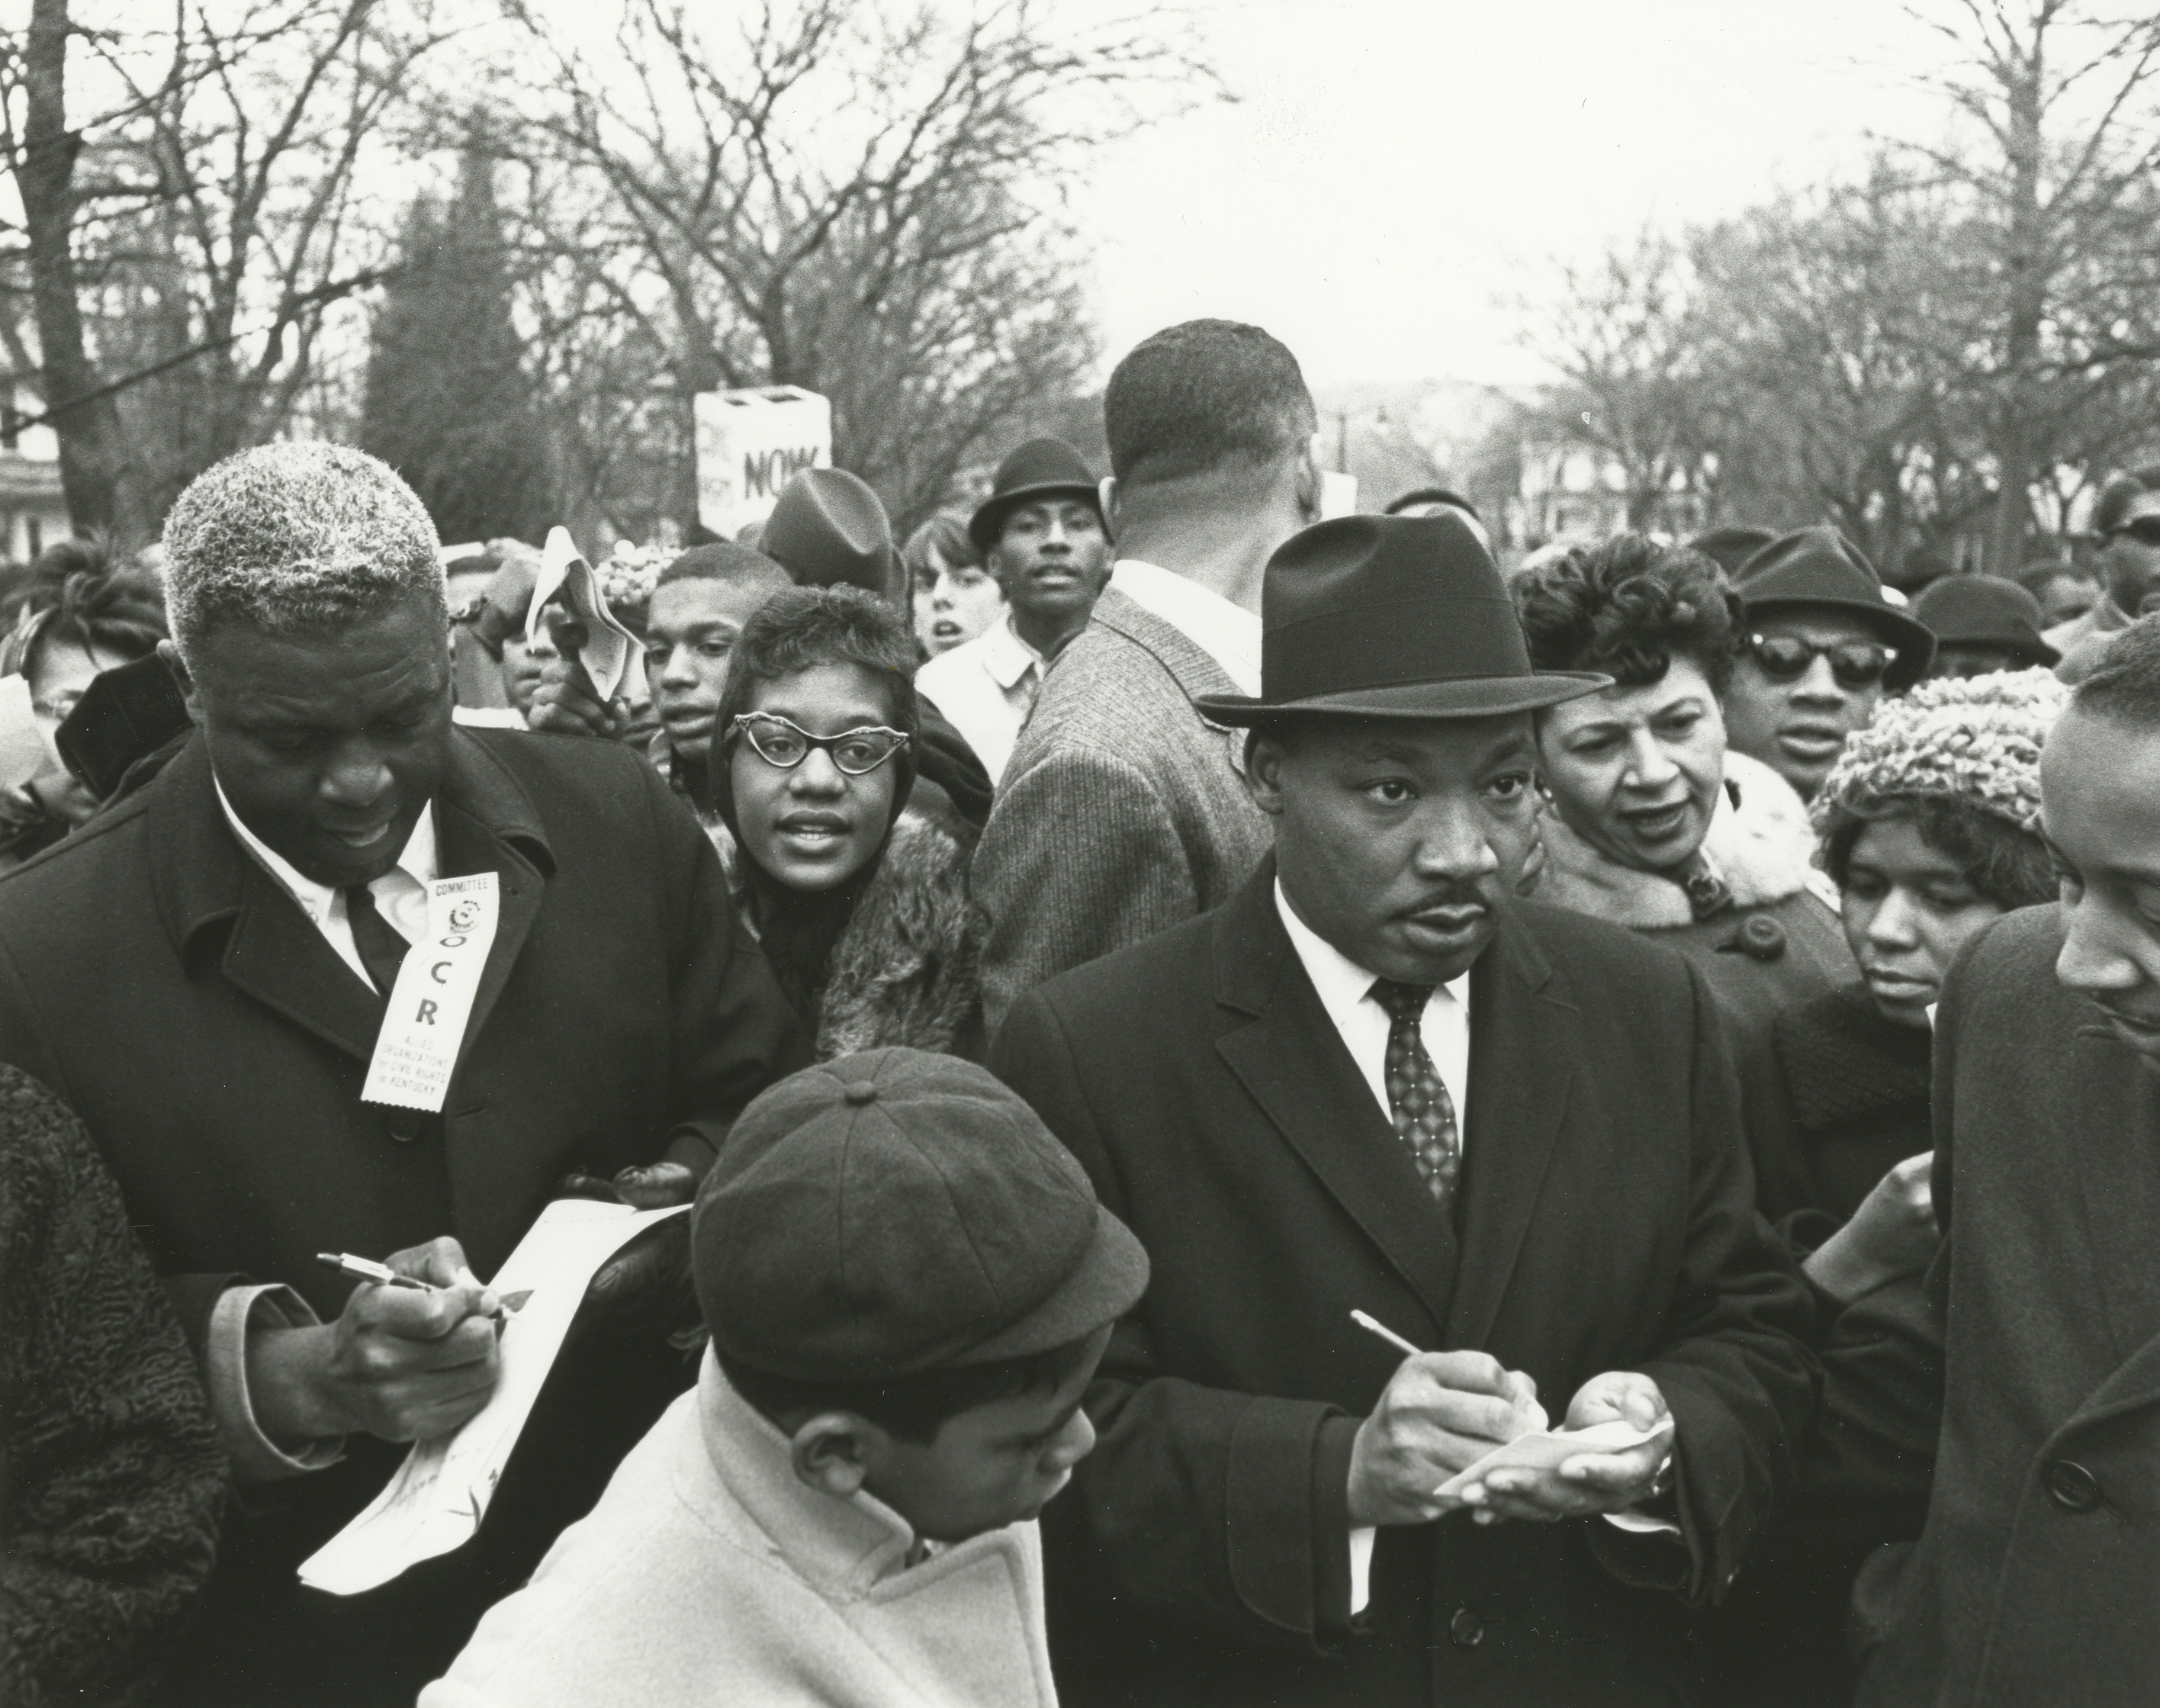 Baseball Was Unequipped to Handle Dr. King’s Assassination in 1968